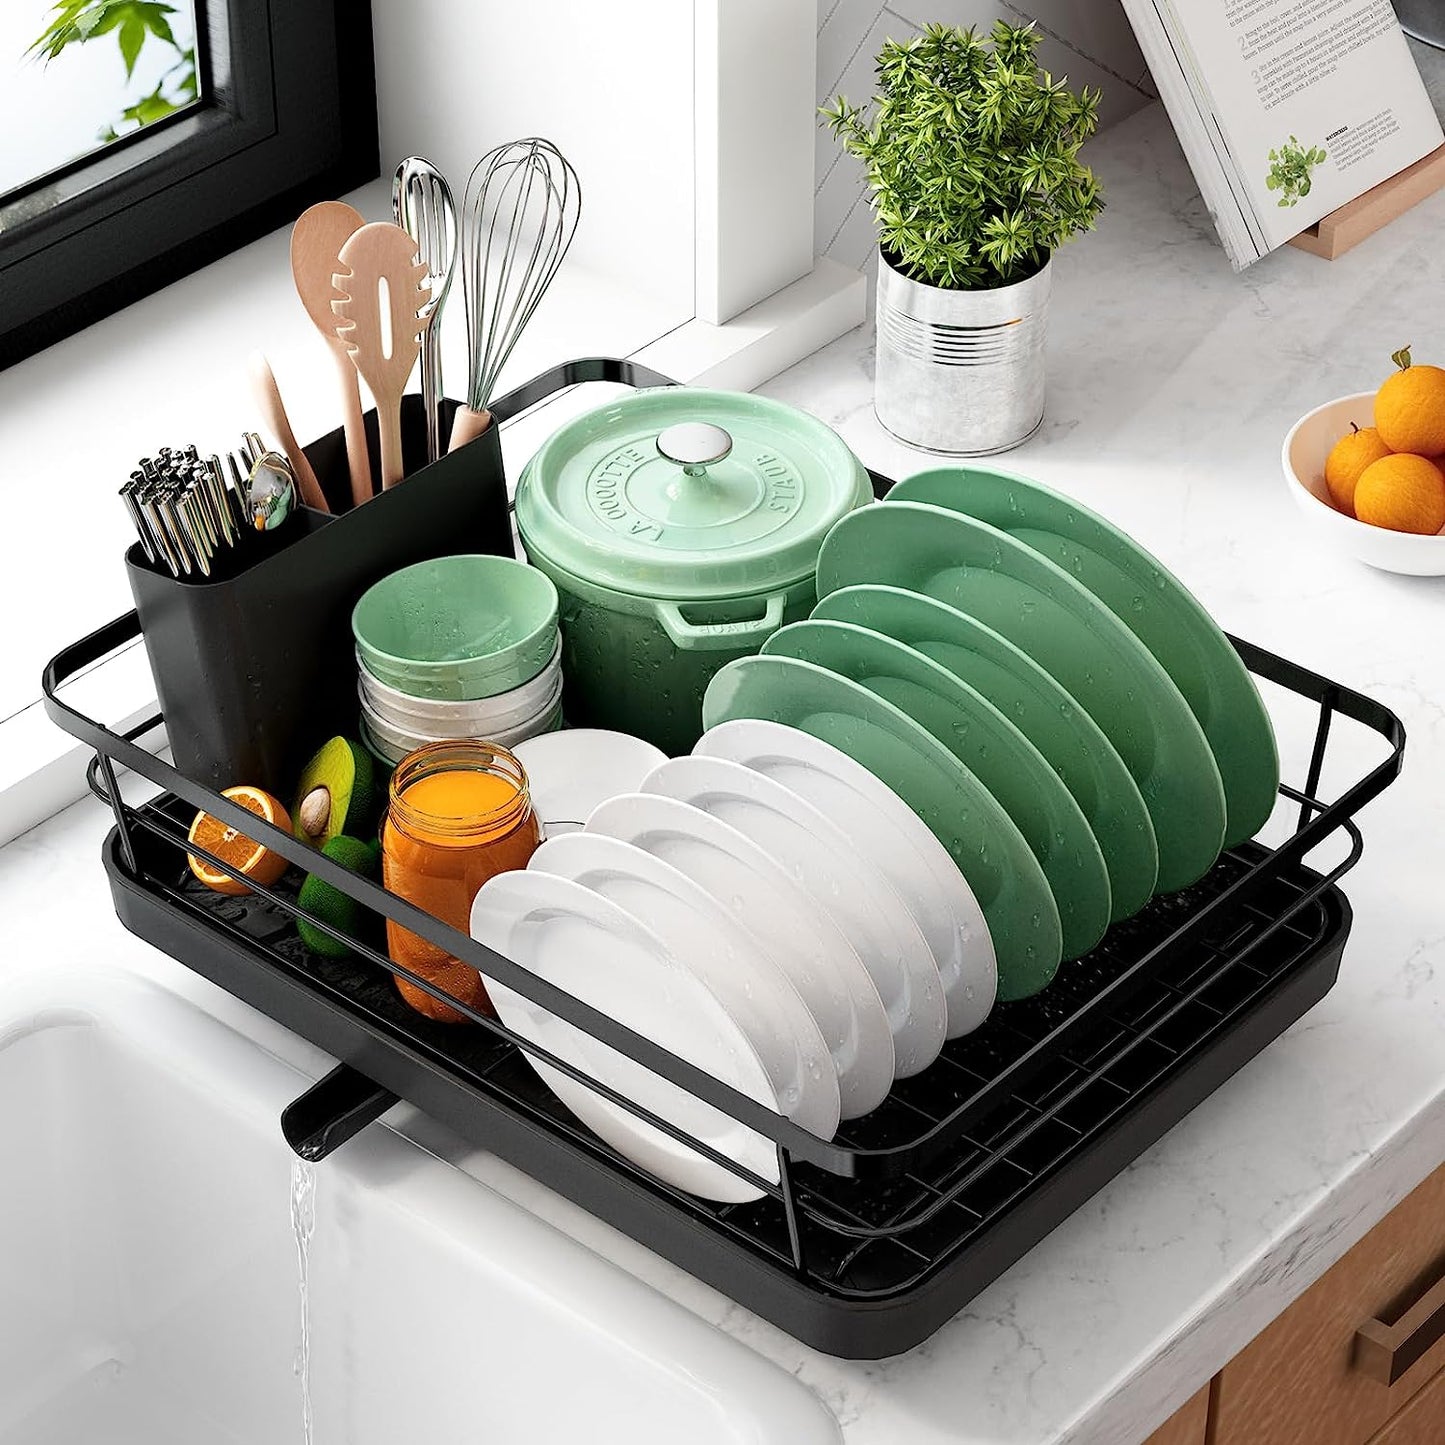 Over Sink Adjustable Dish Drying Rack In Stainless Steel. Space-Saving  Kitchen Solutions.